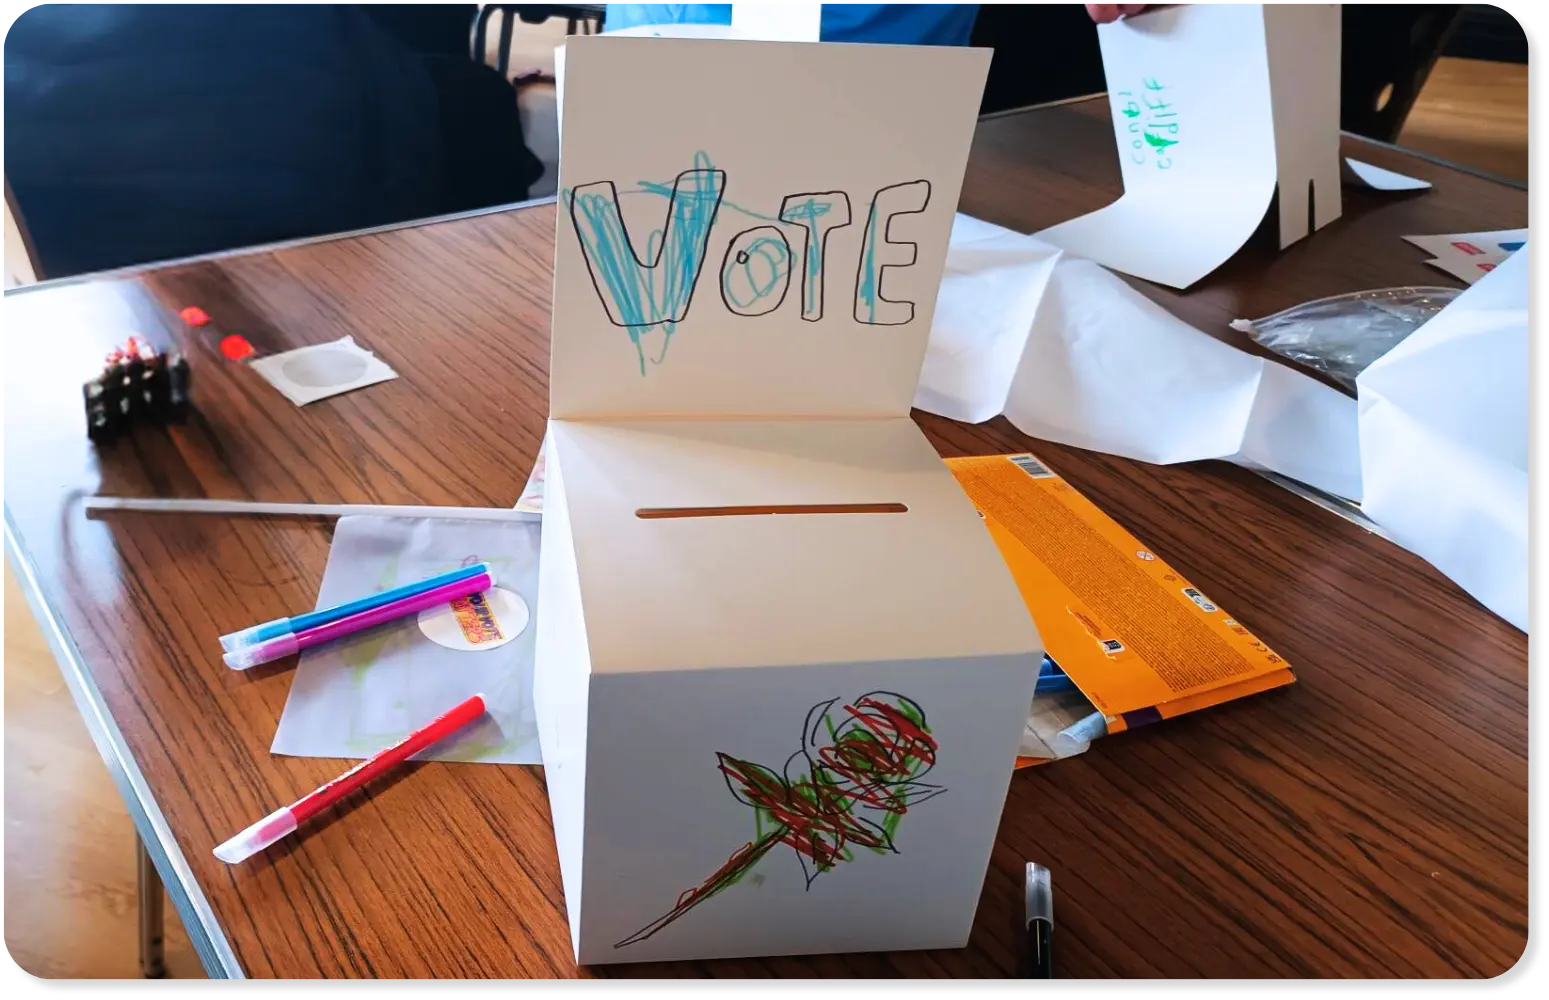 a handmade ballot box that says 'vote' with a slot to place voting ballot papers